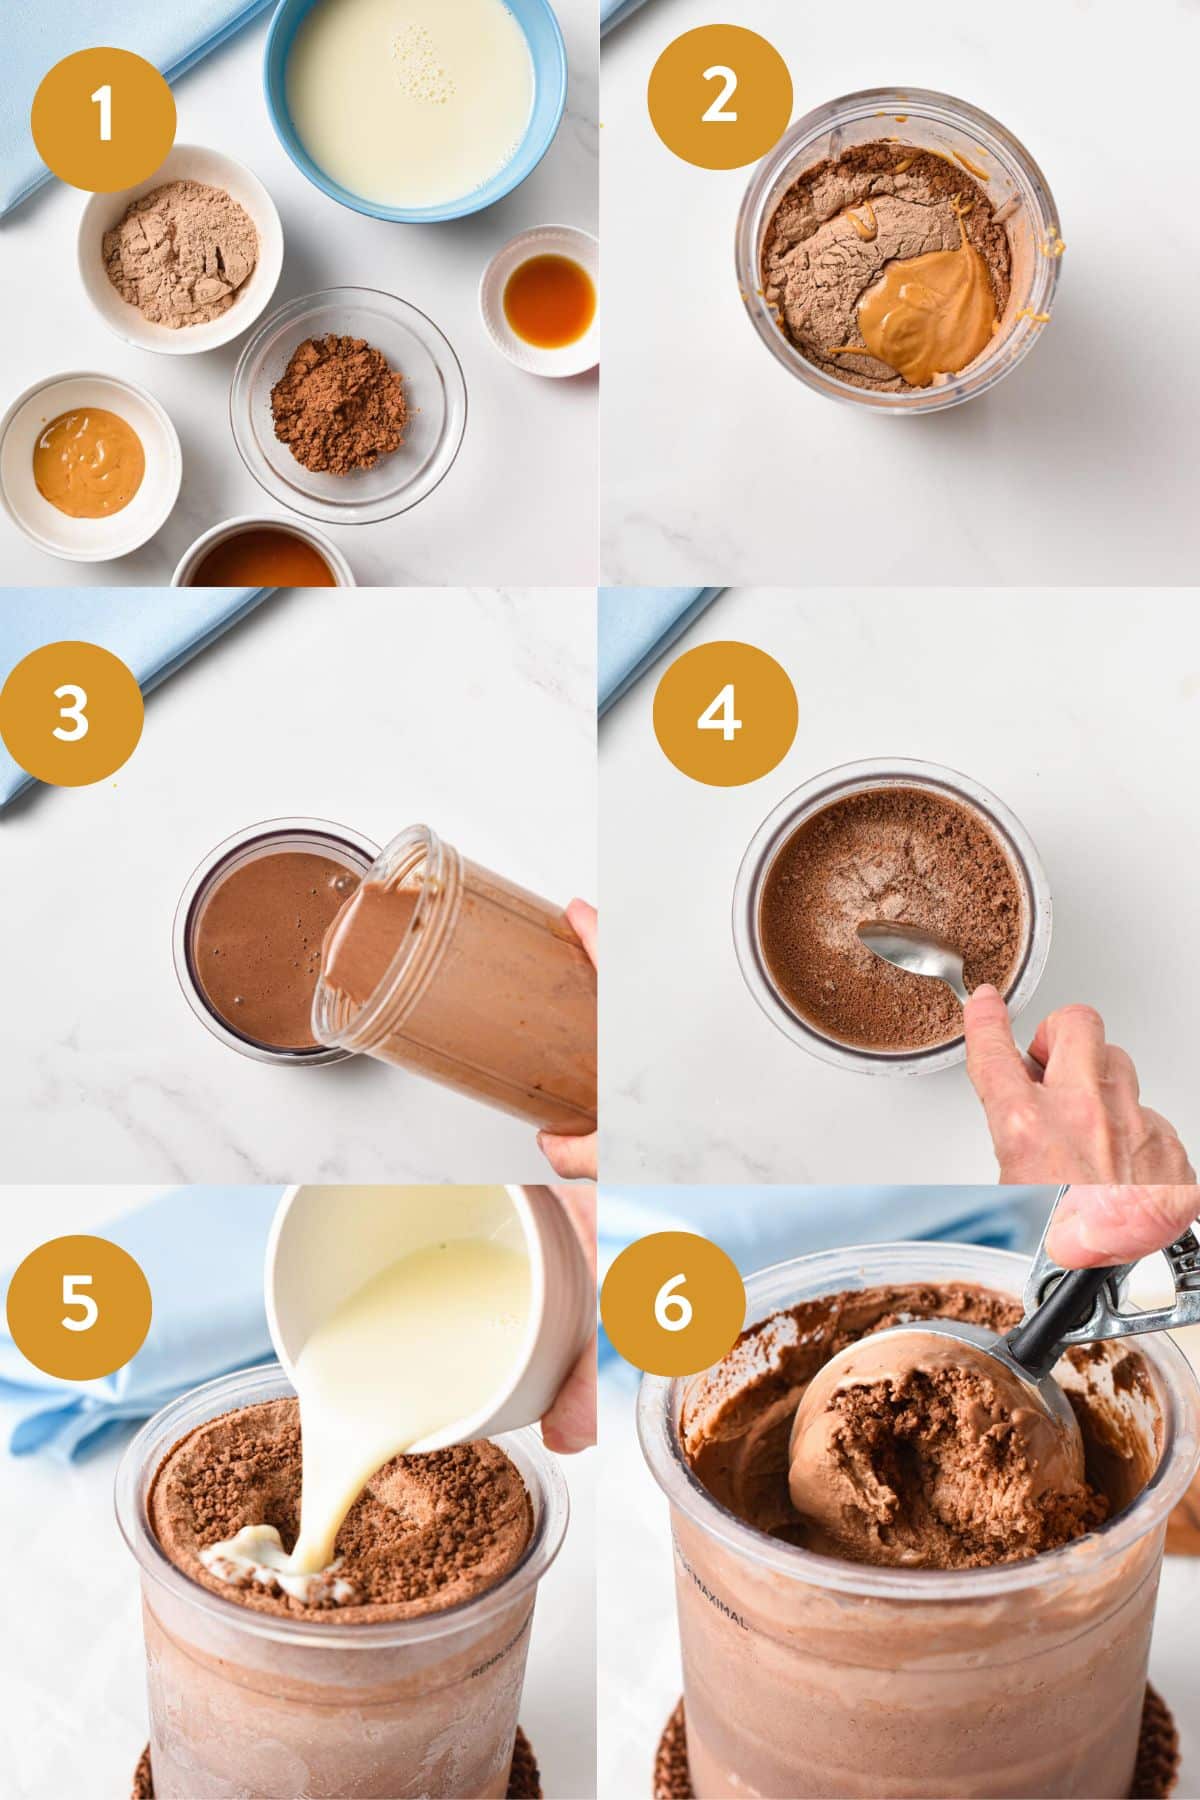 This Ninja Creami Protein Ice Cream is the easiest protein ice cream you can make this summer using the Ninja Creami ice cream maker and contains 15 grams of protein per serving. This Ninja Creami Protein Ice Cream is the easiest protein ice cream you can make this summer using the Ninja Creami ice cream maker and contains 15 grams of protein per serving.